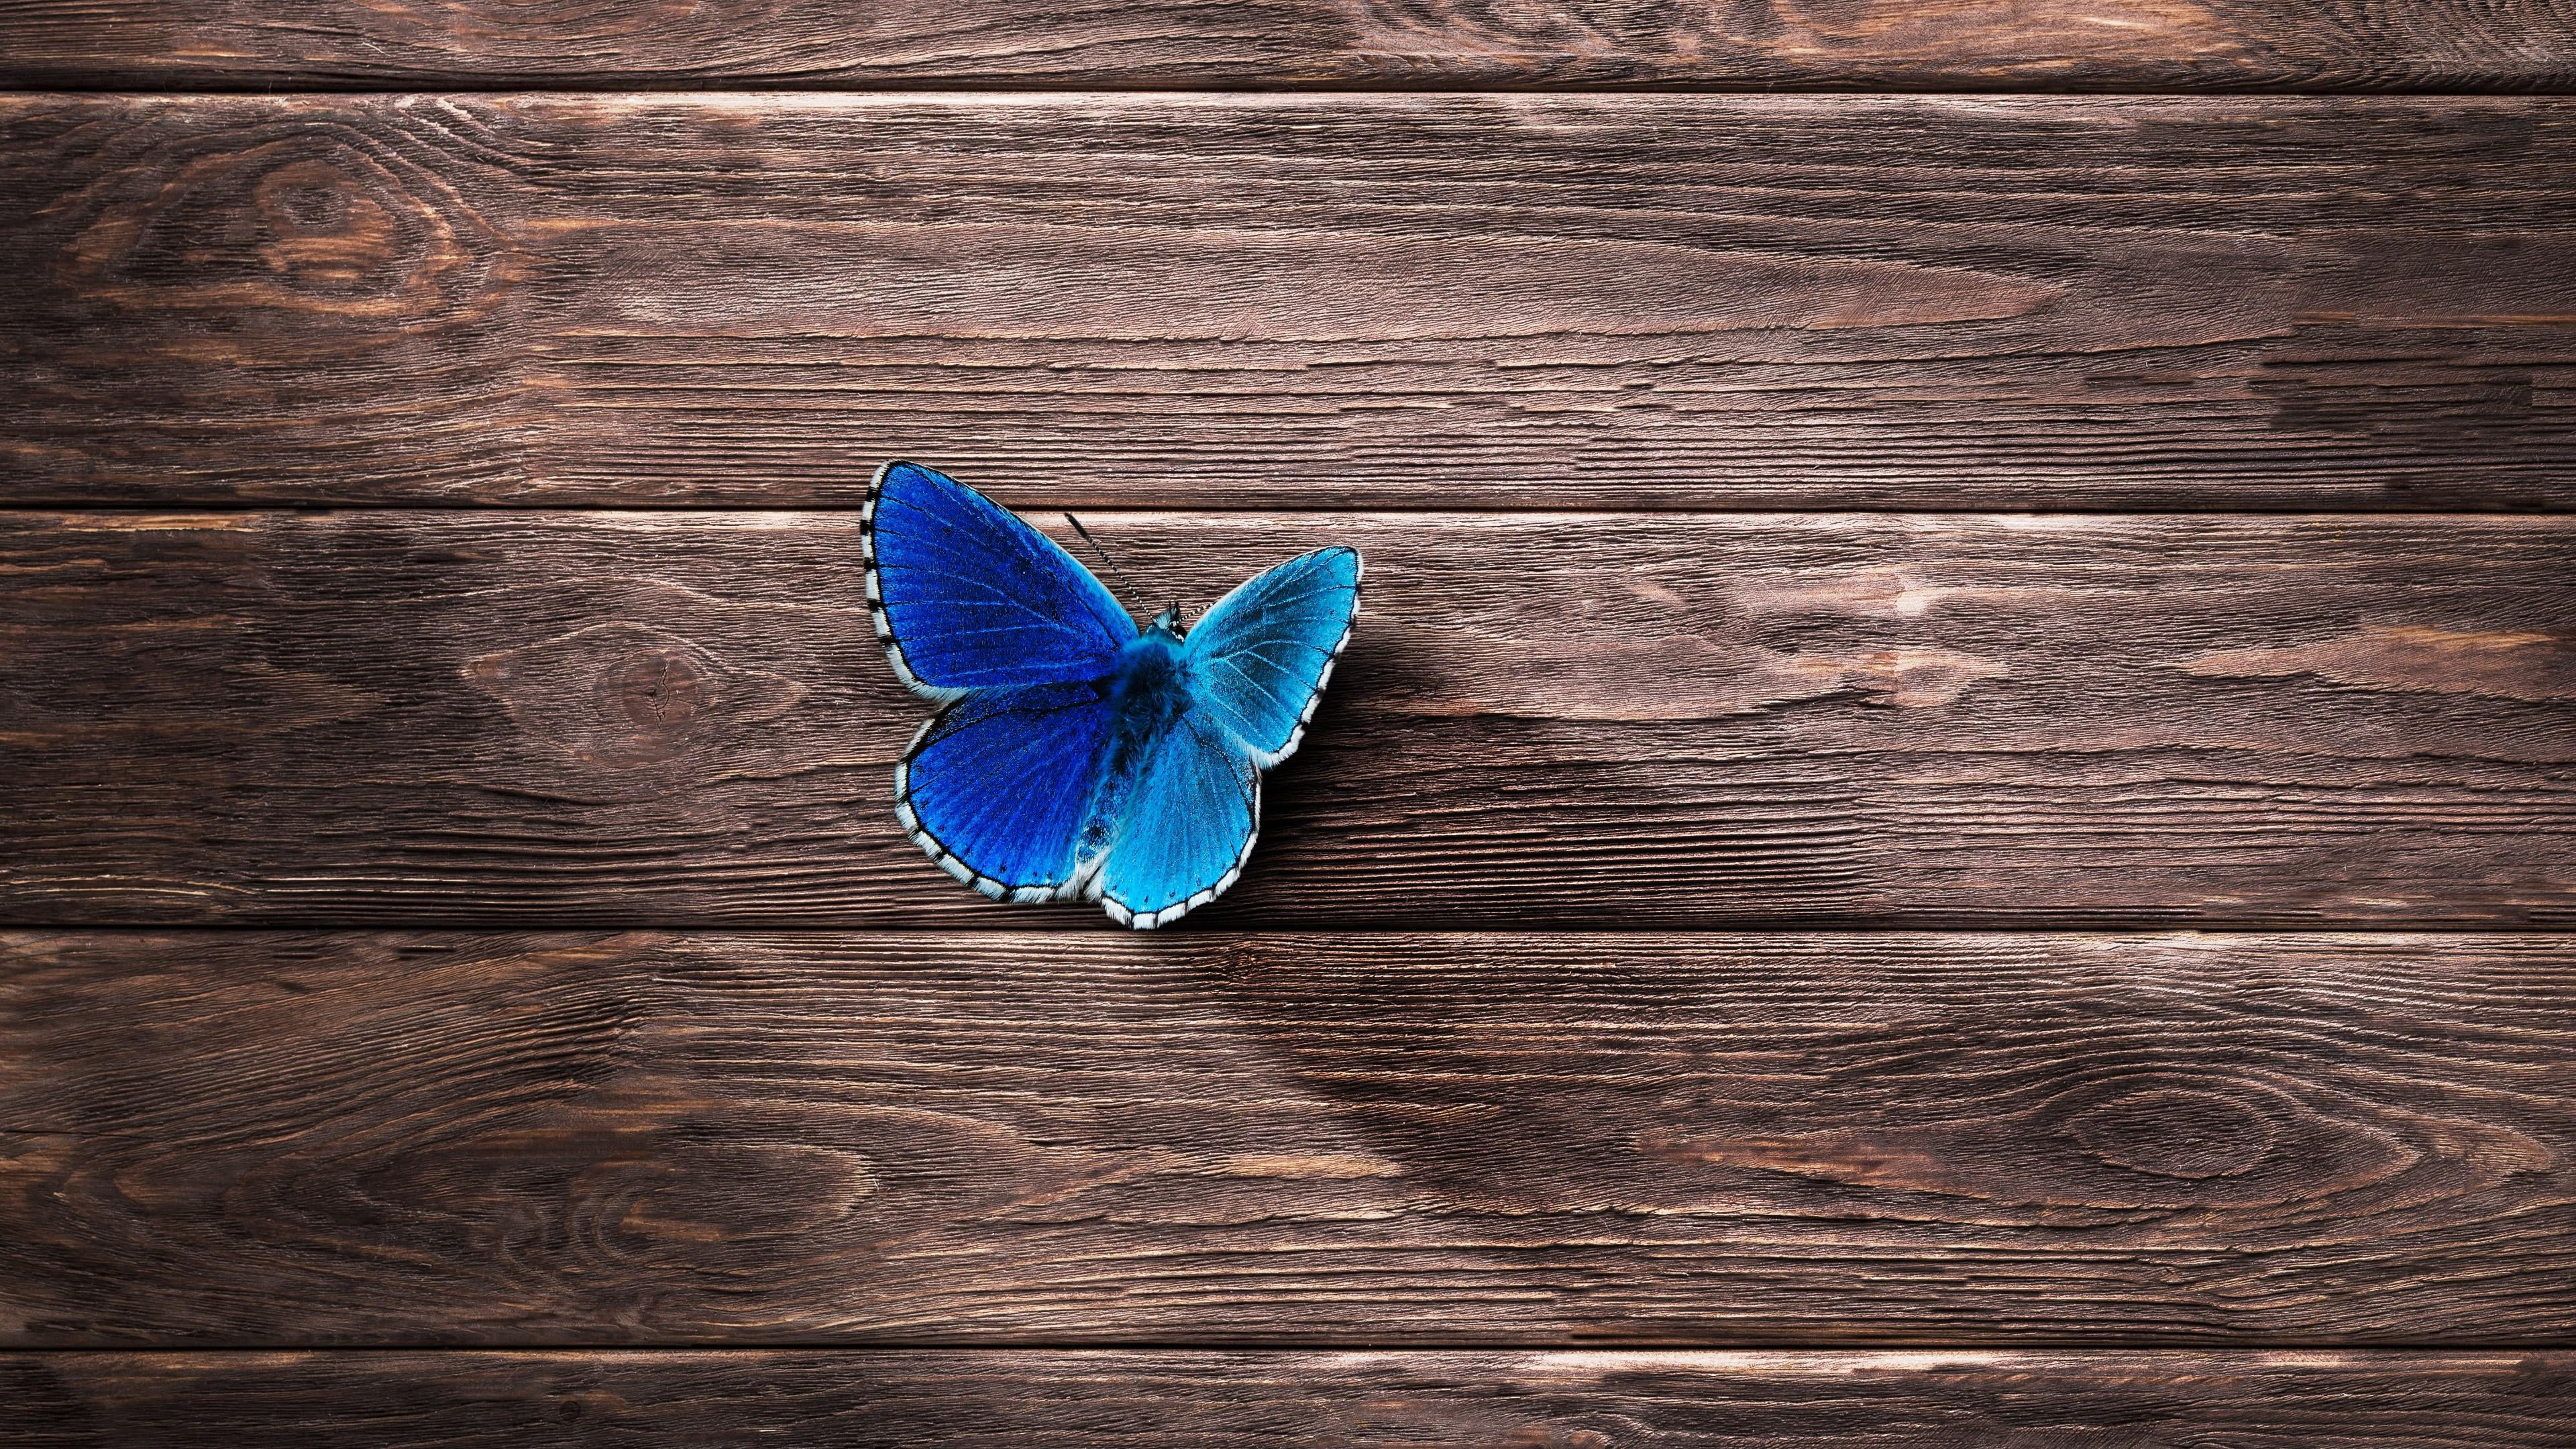 butterfly, surface, wood, wooden, blue, close up, wood - material